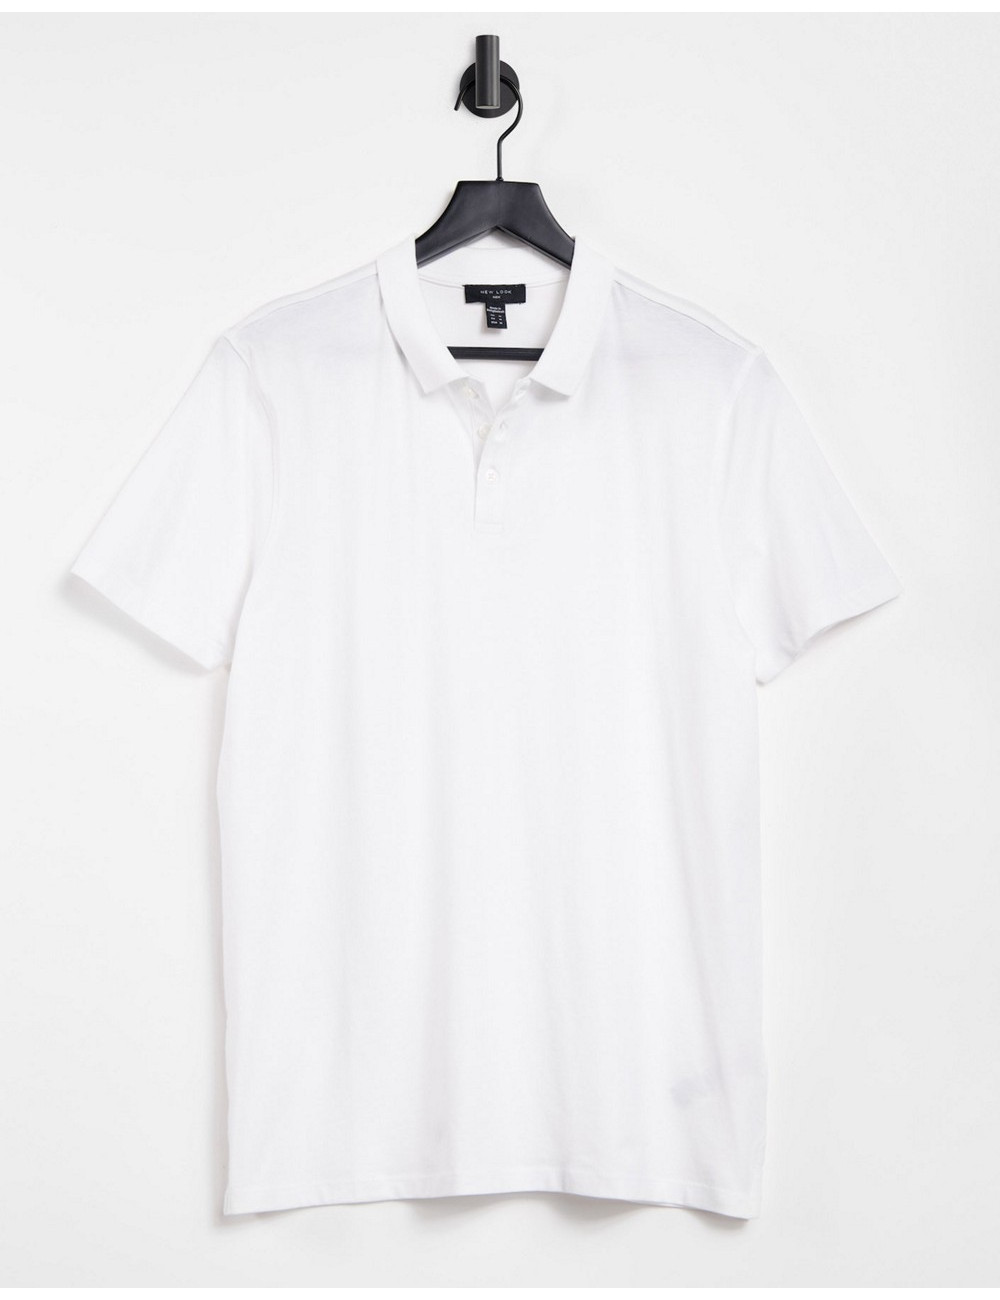 New Look jersey polo in white